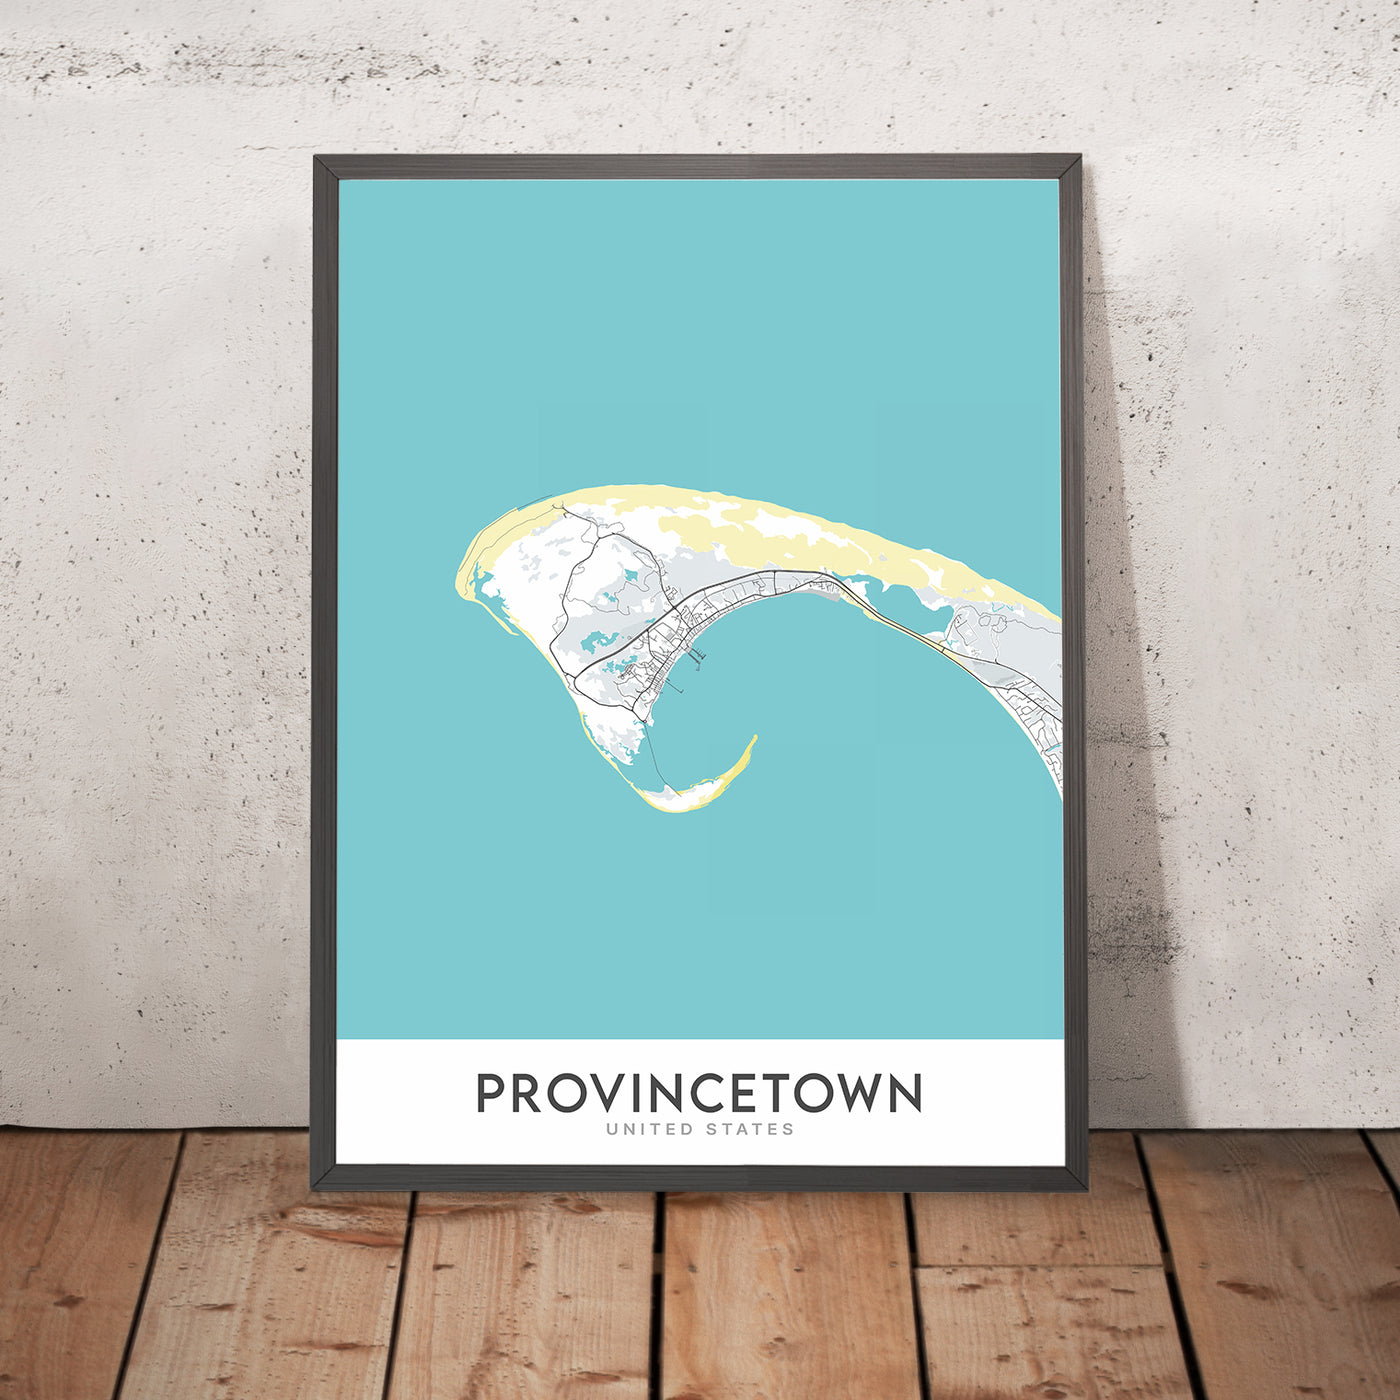 Modern City Map of Provincetown, MA: Pilgrim Monument, Race Point Beach, Herring Cove Beach, Long Point Lighthouse, Route 6